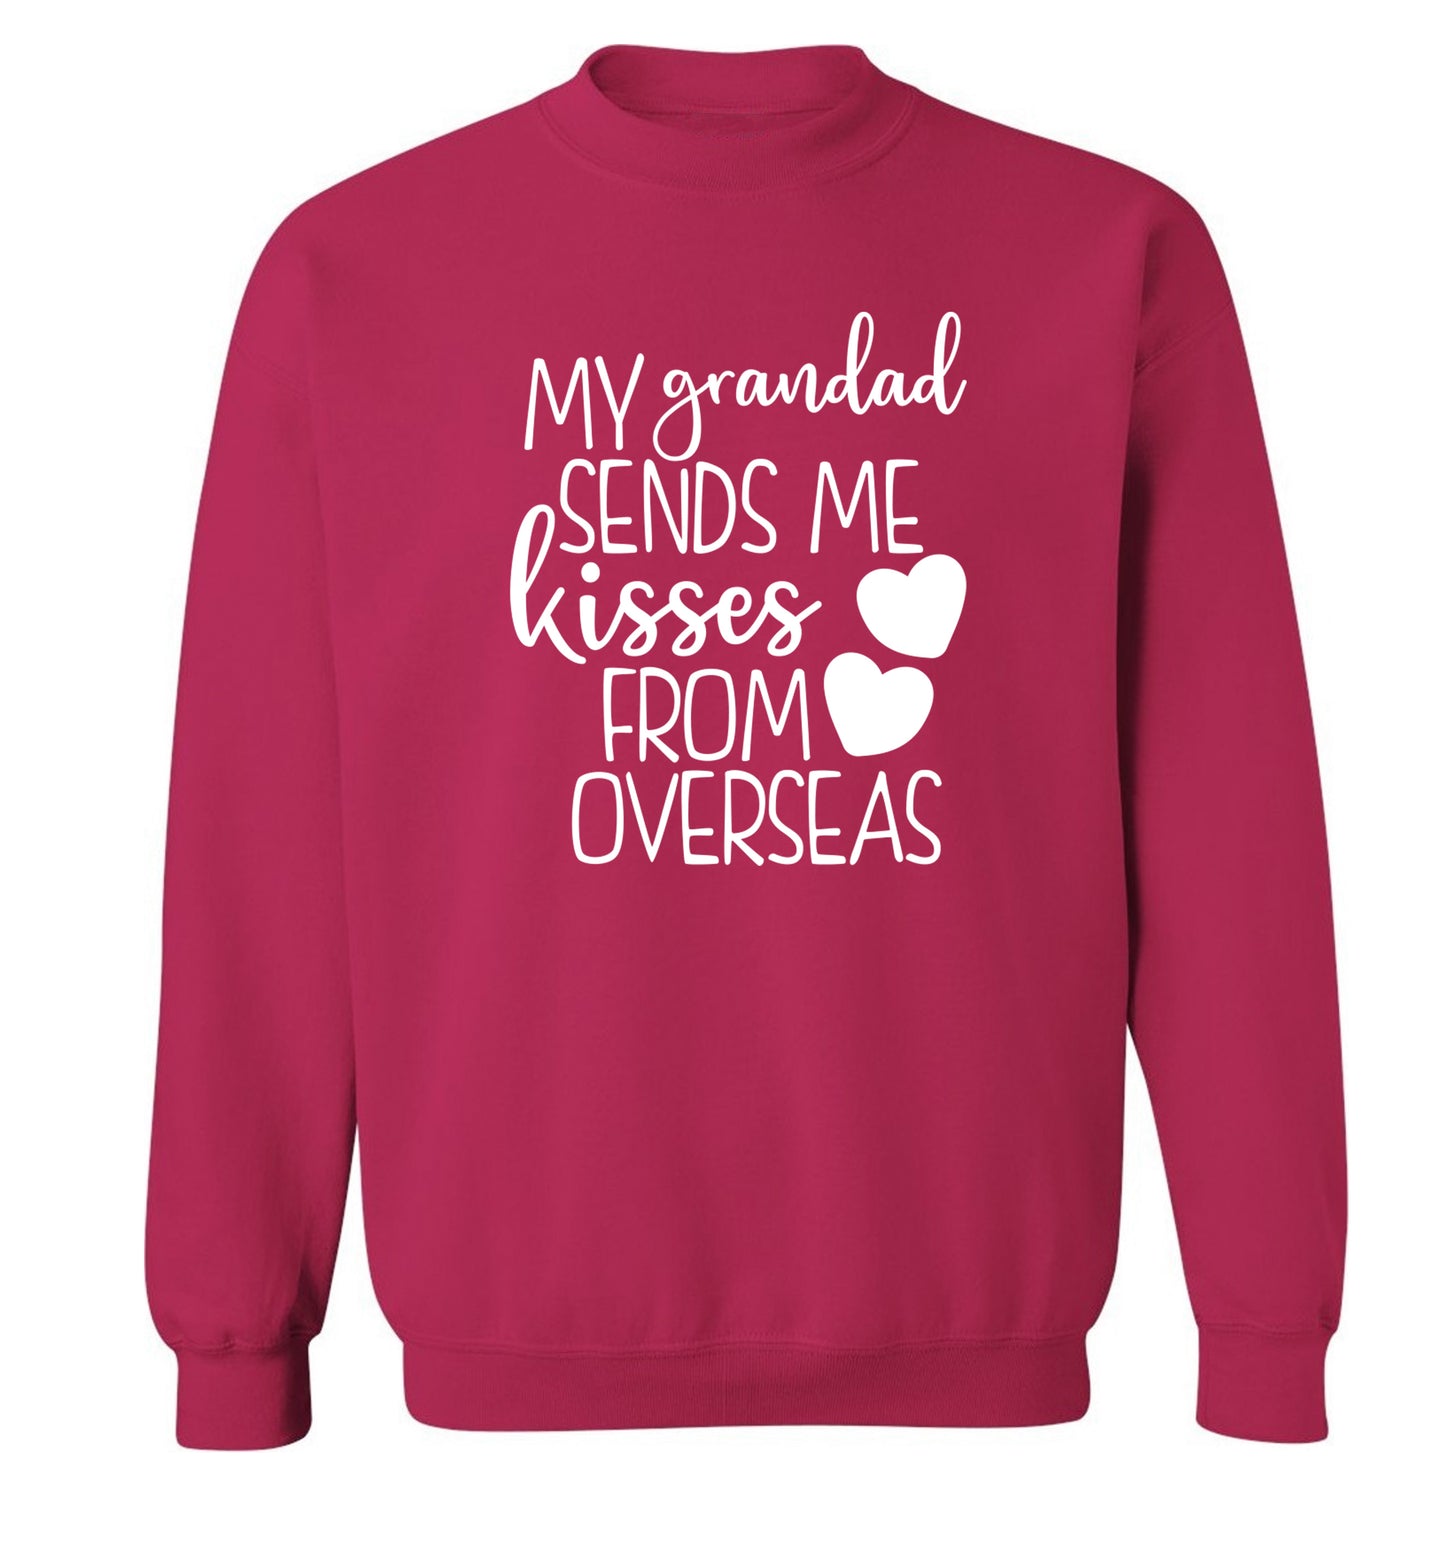 My Grandad sends me kisses from overseas Adult's unisex pink Sweater 2XL